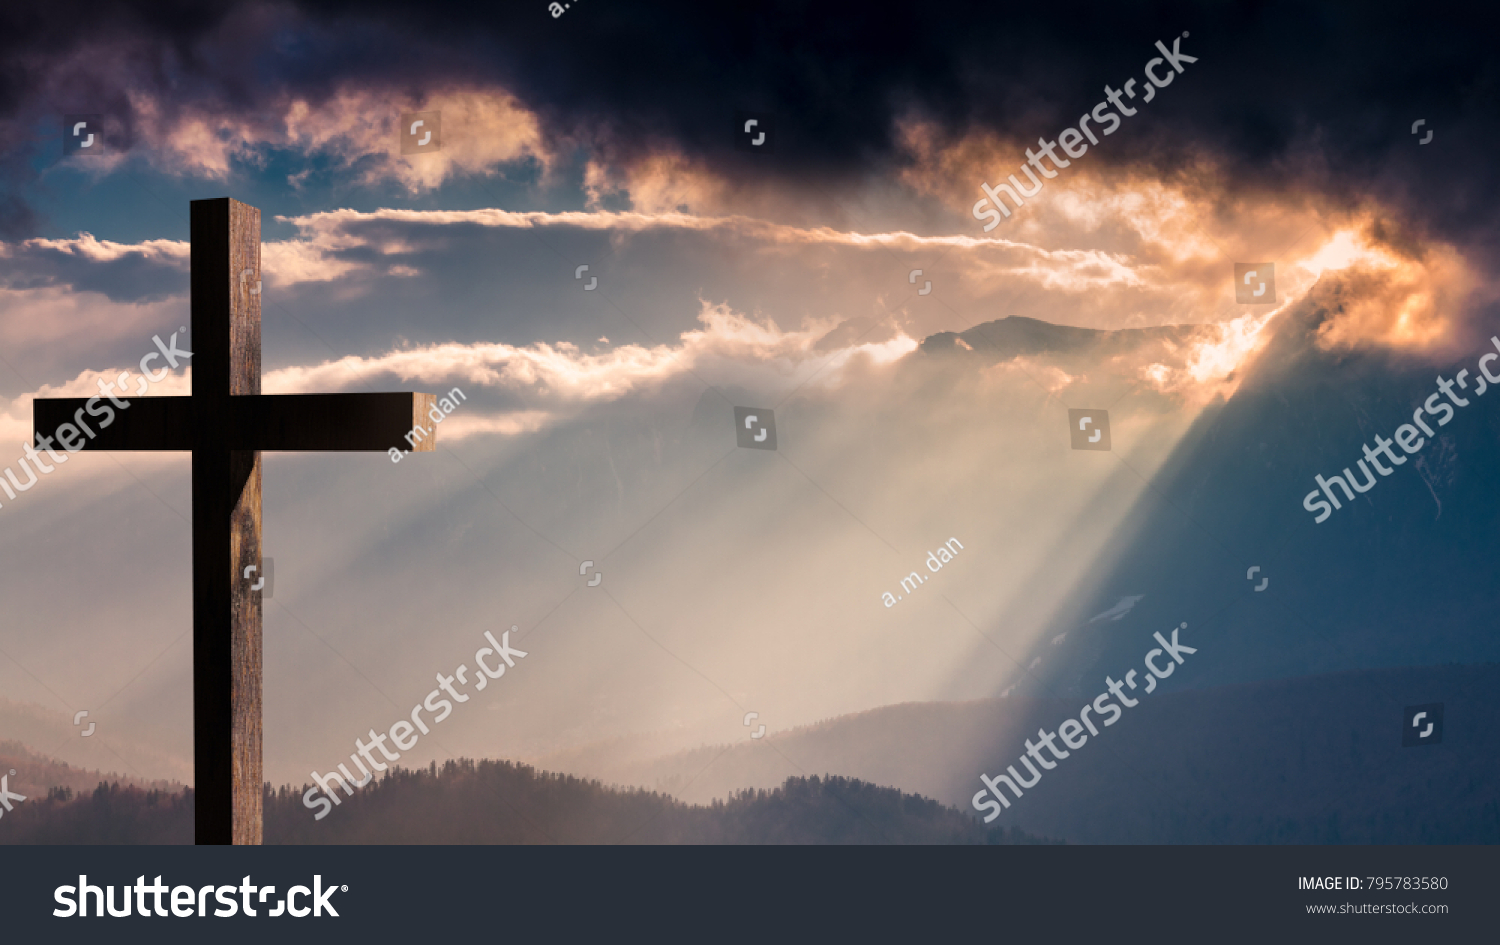 Jesus Christ cross. Easter, resurrection concept. Christian wooden cross on a background with dramatic lighting, colorful mountain sunset, dark clouds and sky, sunbeams  #795783580